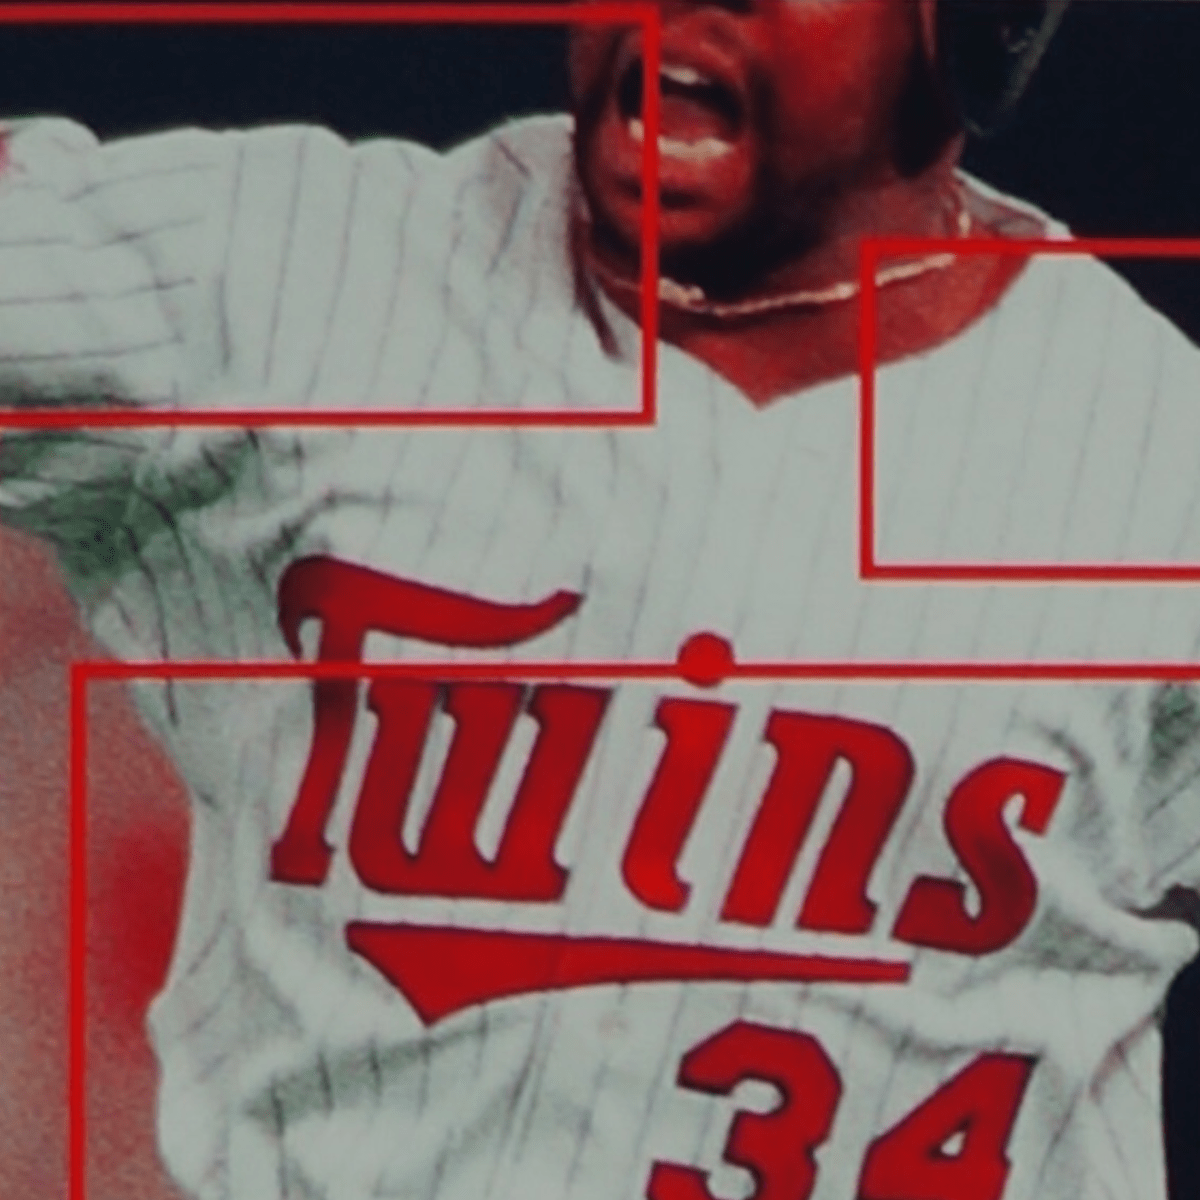 Kirby Puckett's jersey from Game 6 of the 1991 World Series up for